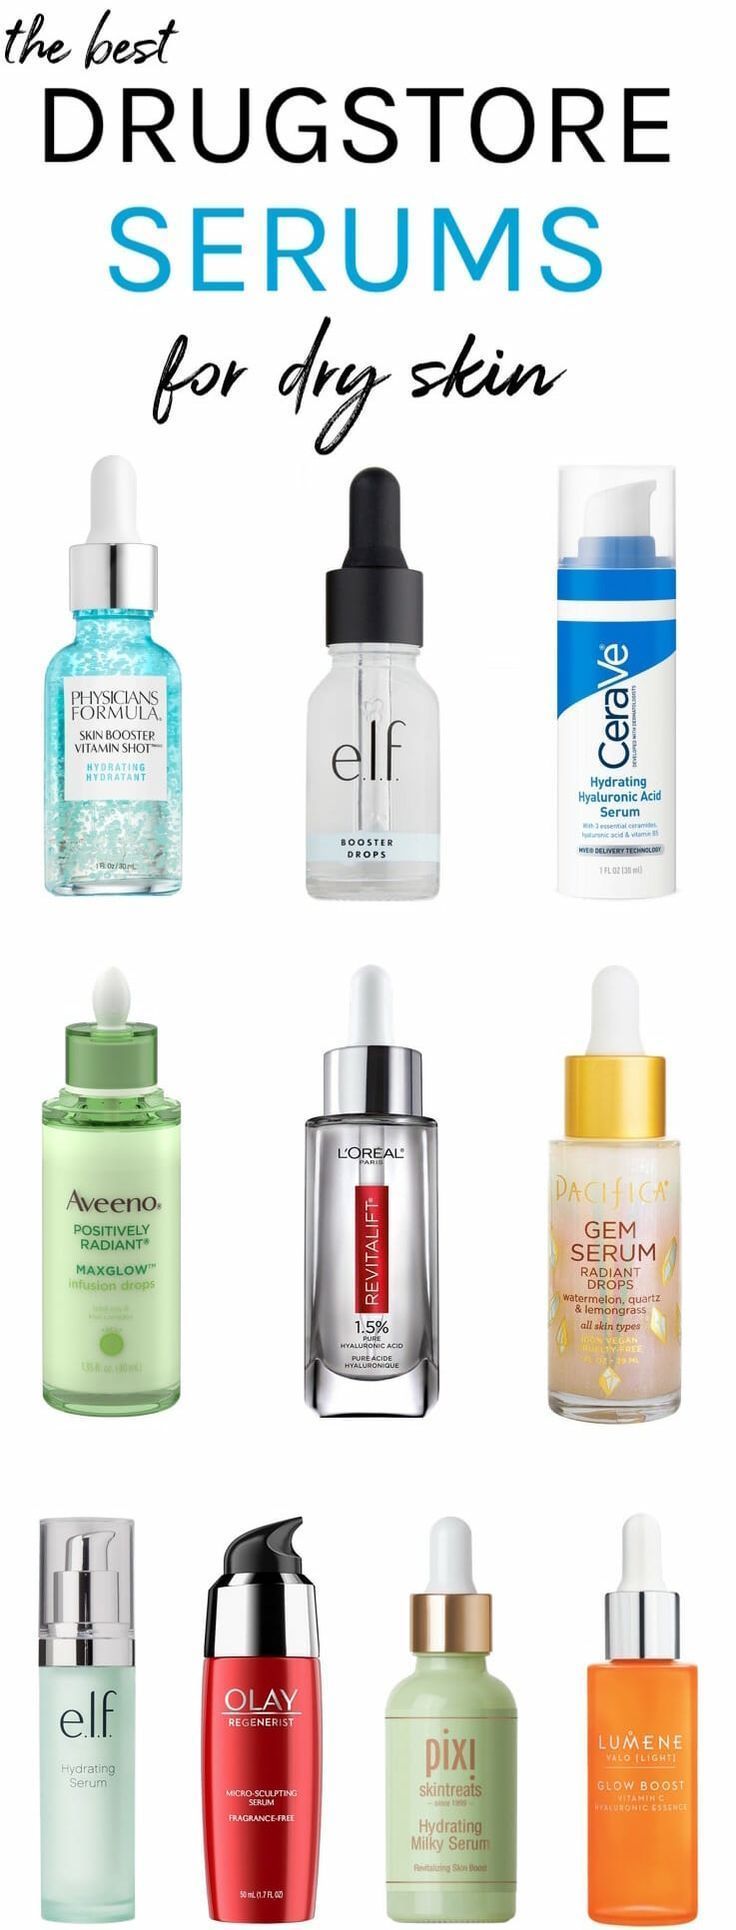 Winter Woes Begone! The Best Drugstore Serums For Dry Skin -   8 skin care Drugstore style ideas